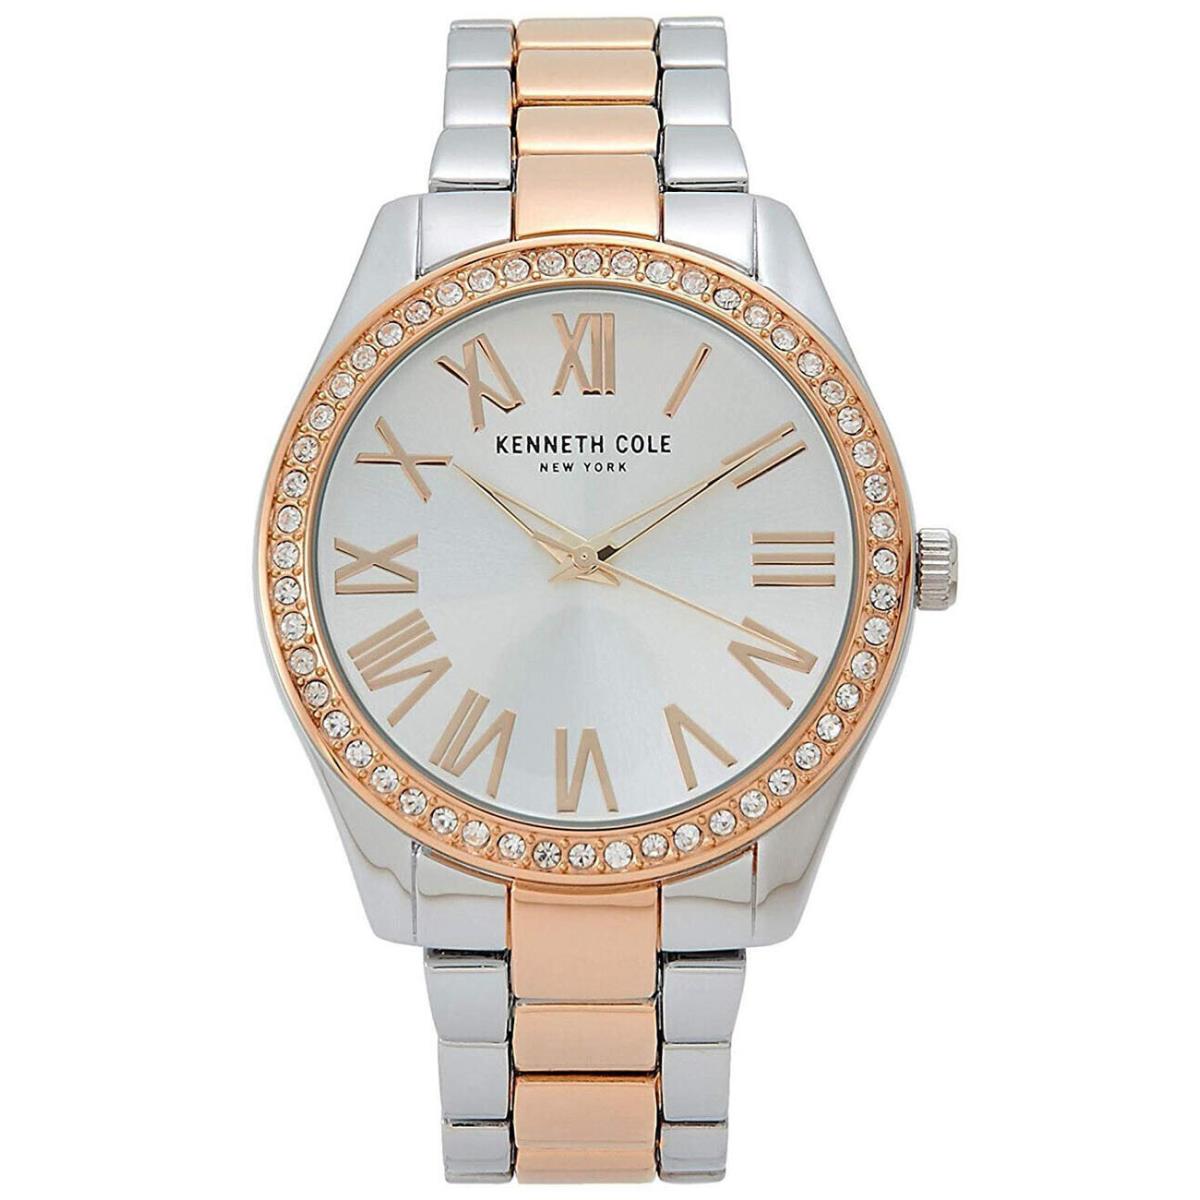 Swatch Kenneth Cole KC50664007 York Silver Dial Two Tone Stainless Women`s Watch